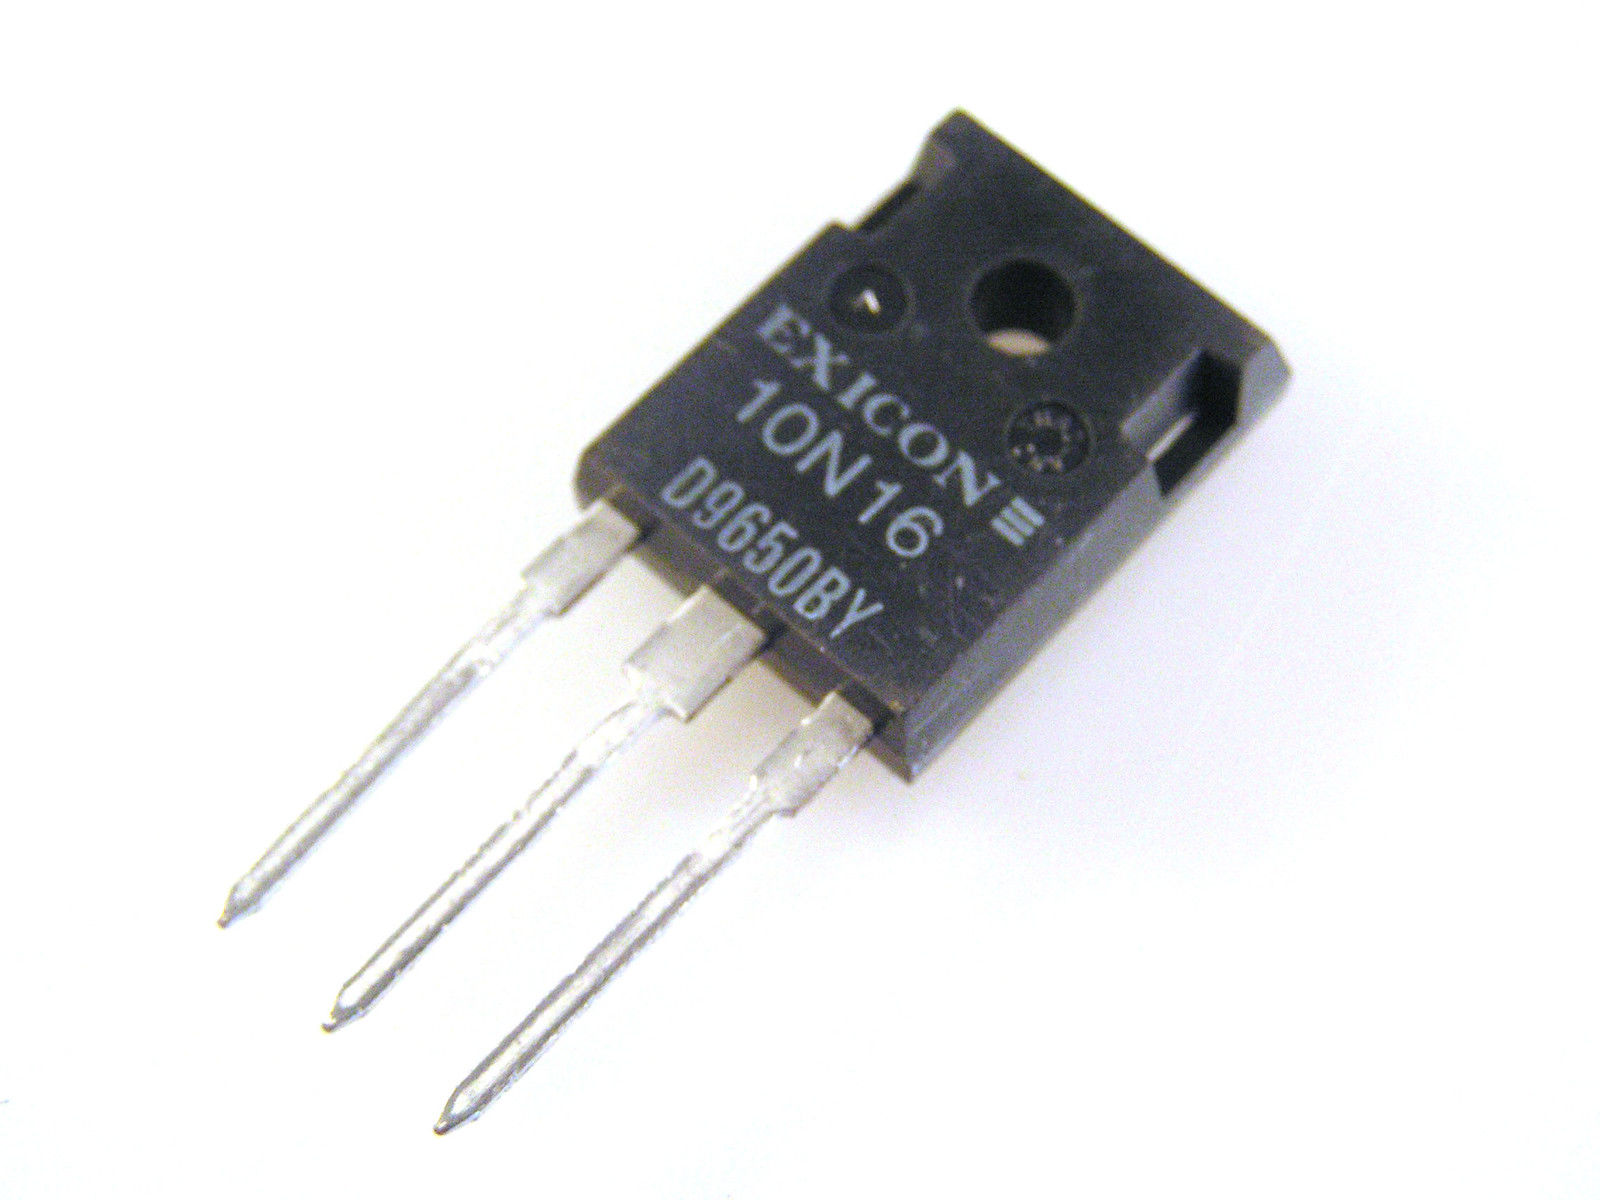 Exicon 10N16 Hi Power N Channel Mosfet 125W 160V TO3P/TO247 OMA028